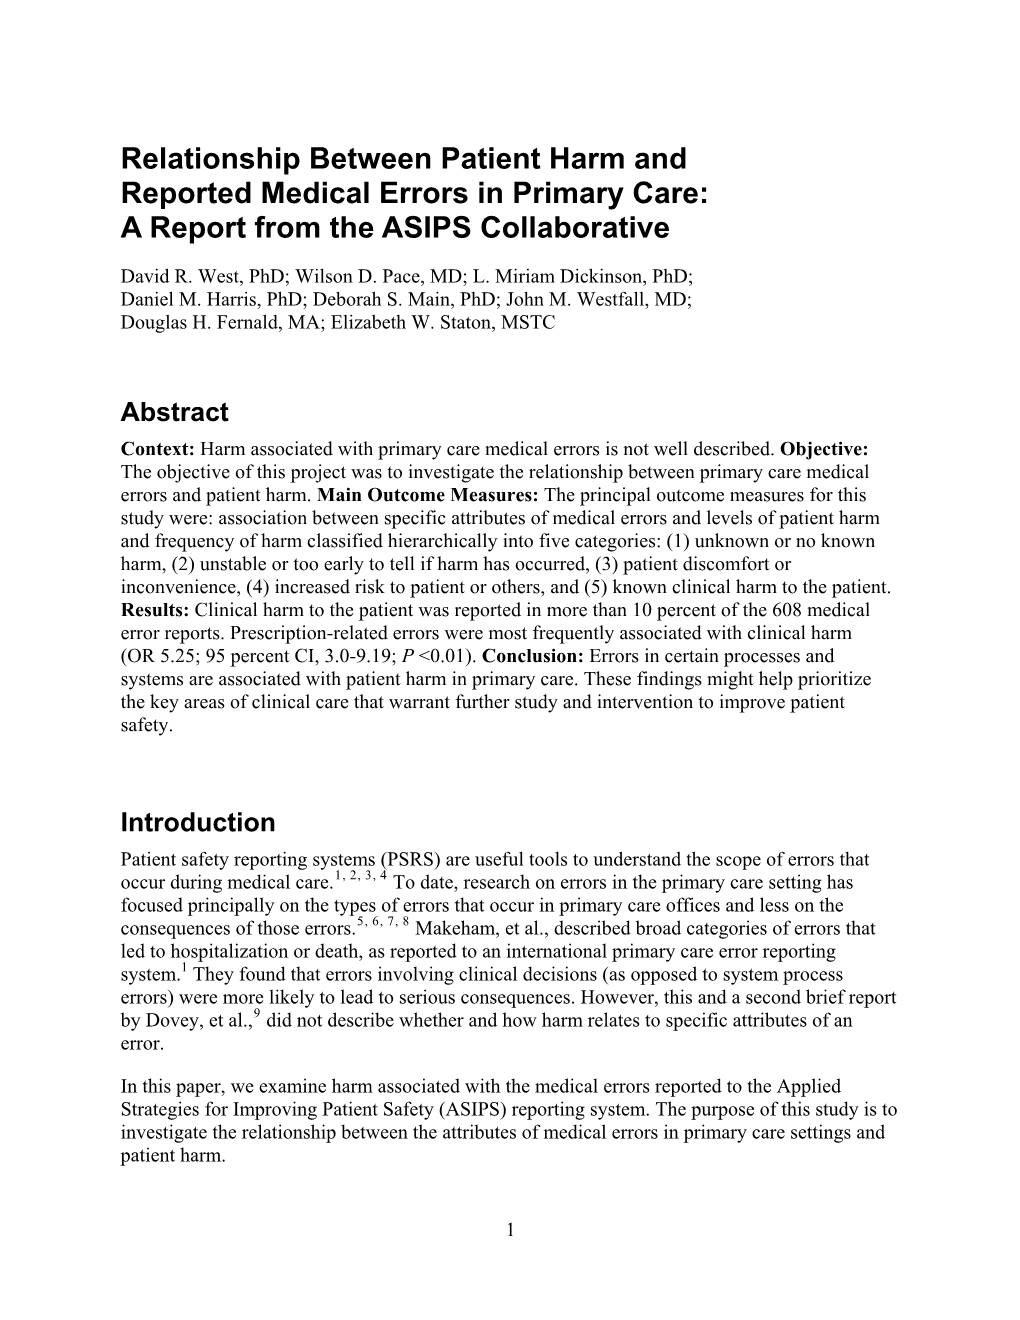 Relationship Between Patient Harm and Reported Medical Errors in Primary Care: a Report from the ASIPS Collaborative